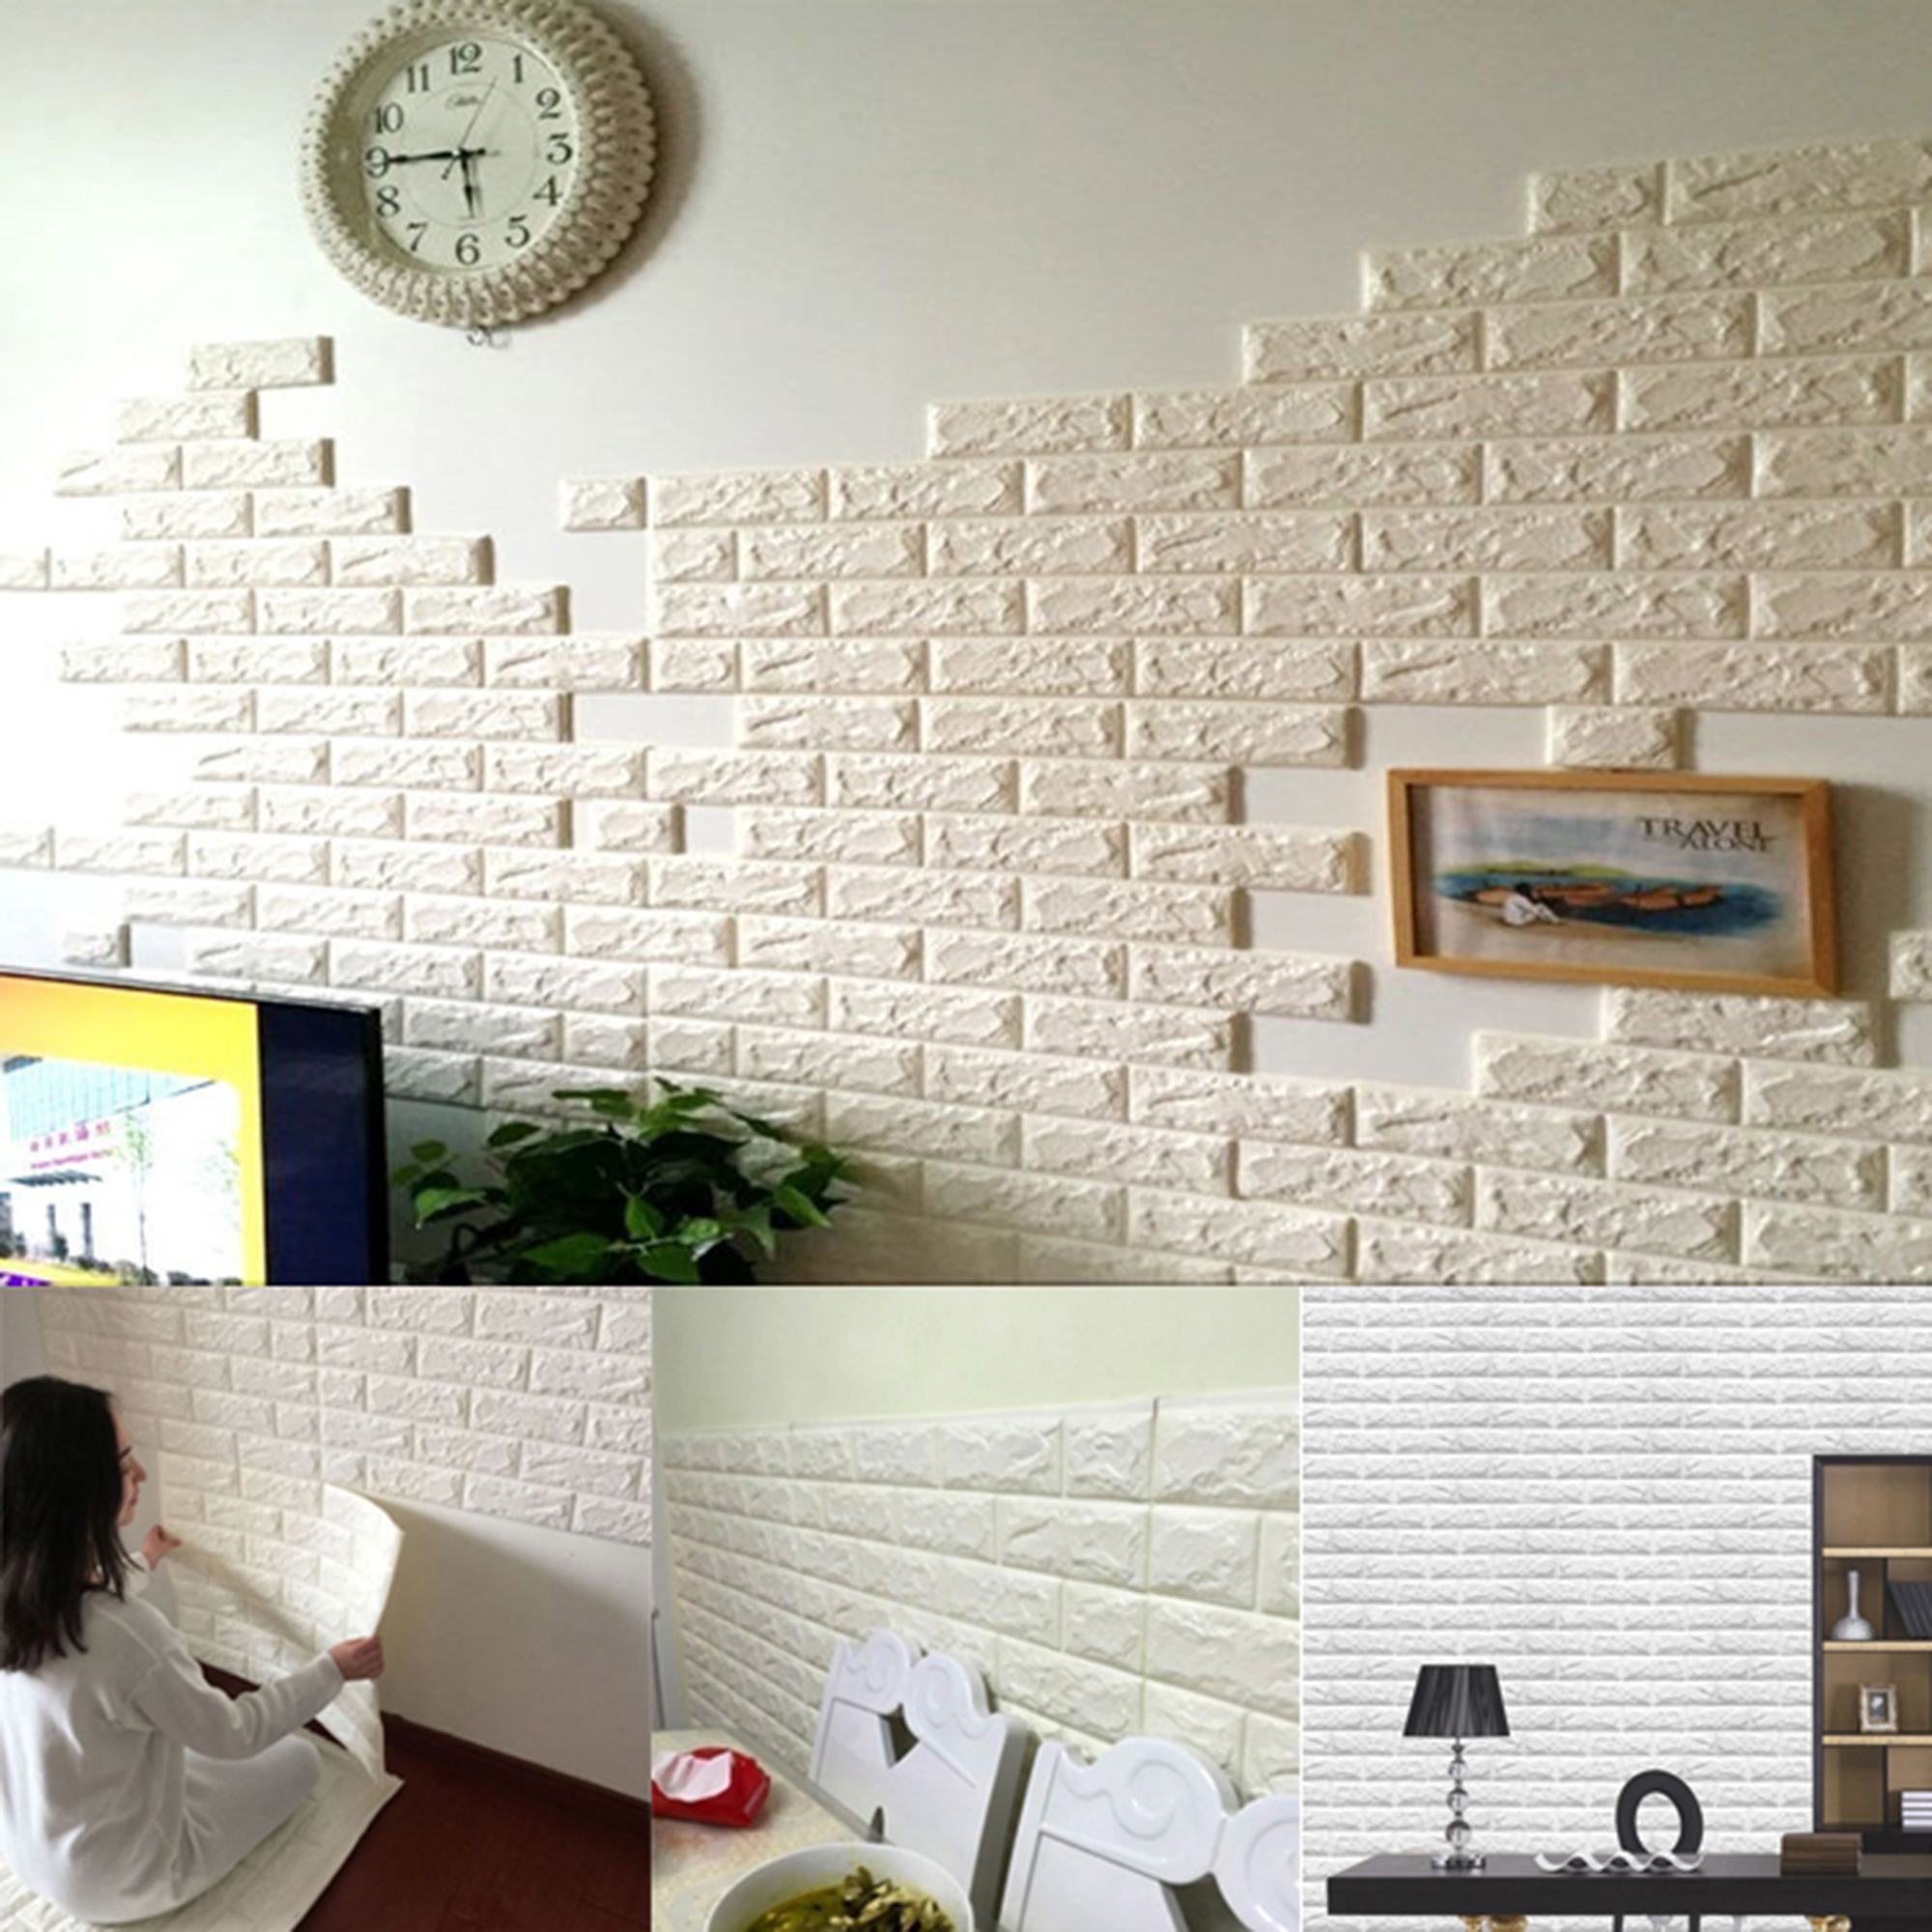 3D Brick Pattern Wall Wallpaper White Brick Self-Adhesive 3D Wall Panels Peel and Stick Wallpaper Bedroom Living Room Wall Sticker Decoration - image 1 of 7